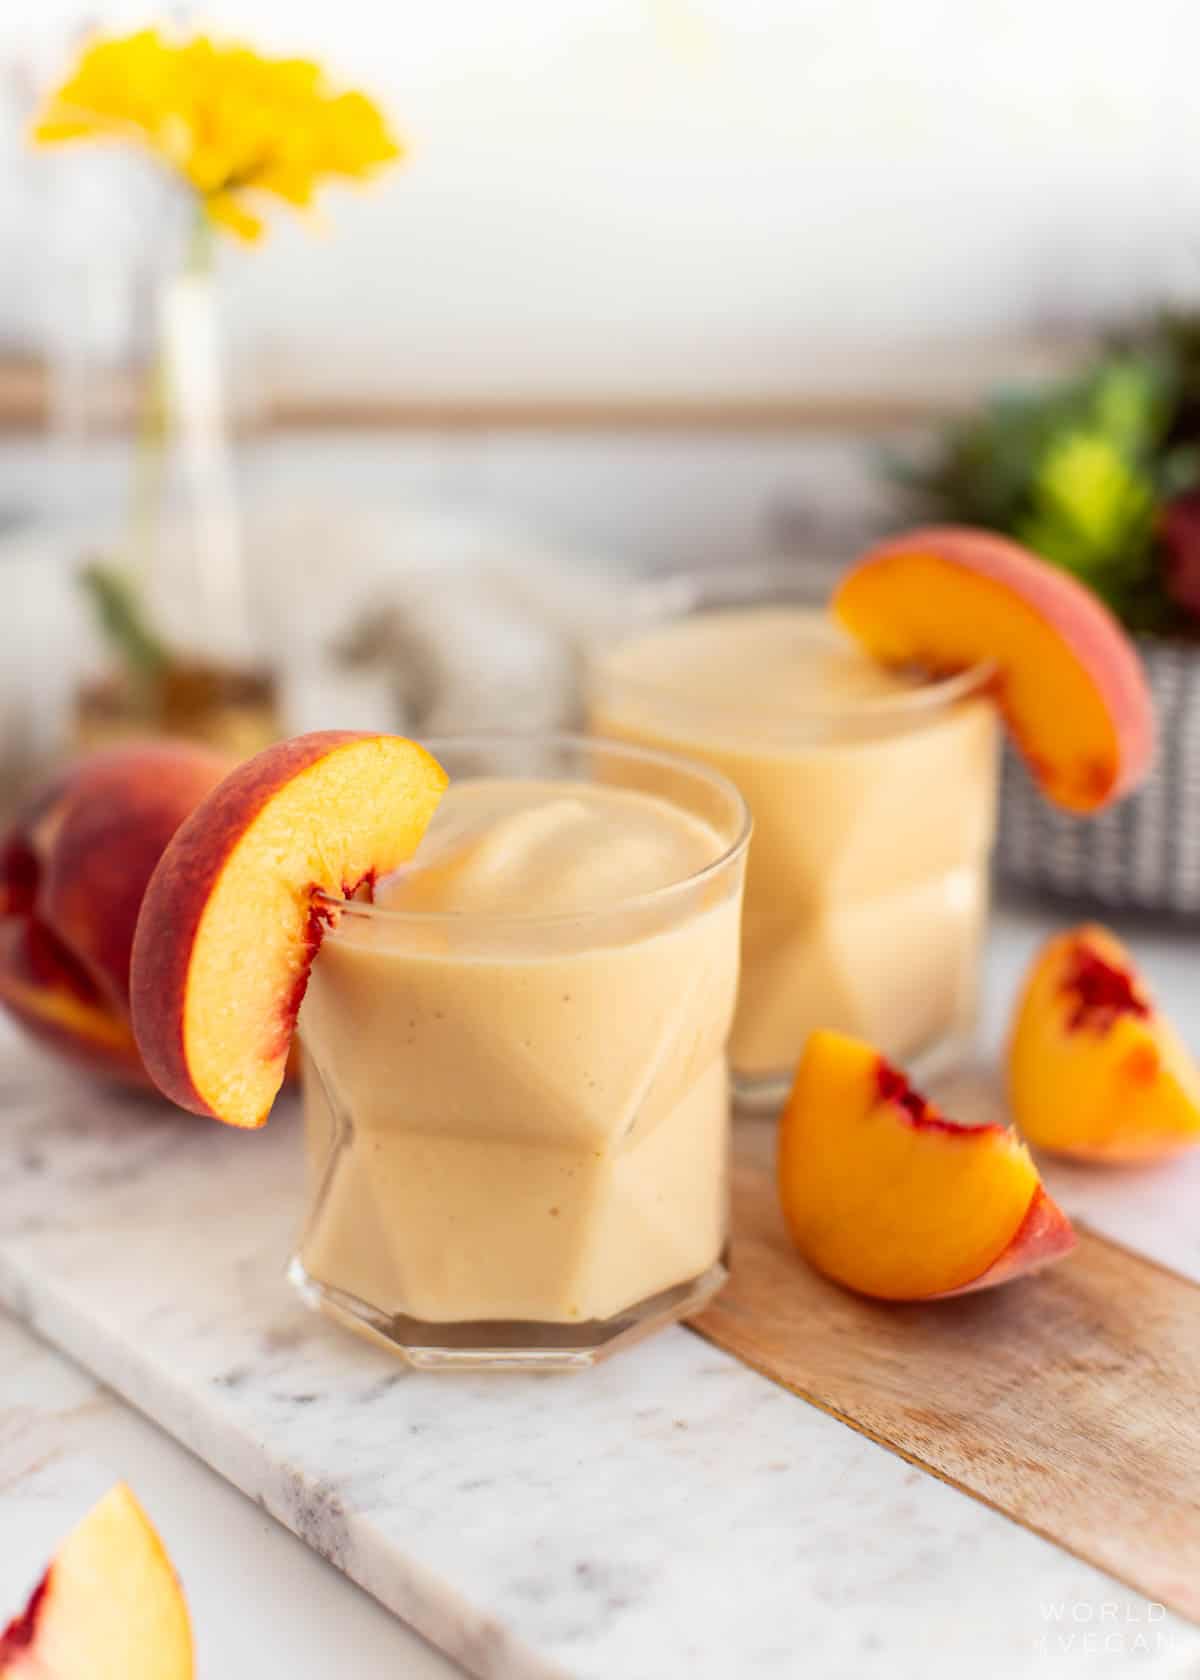 Two banana peach smoothies in glasses with peach slices.